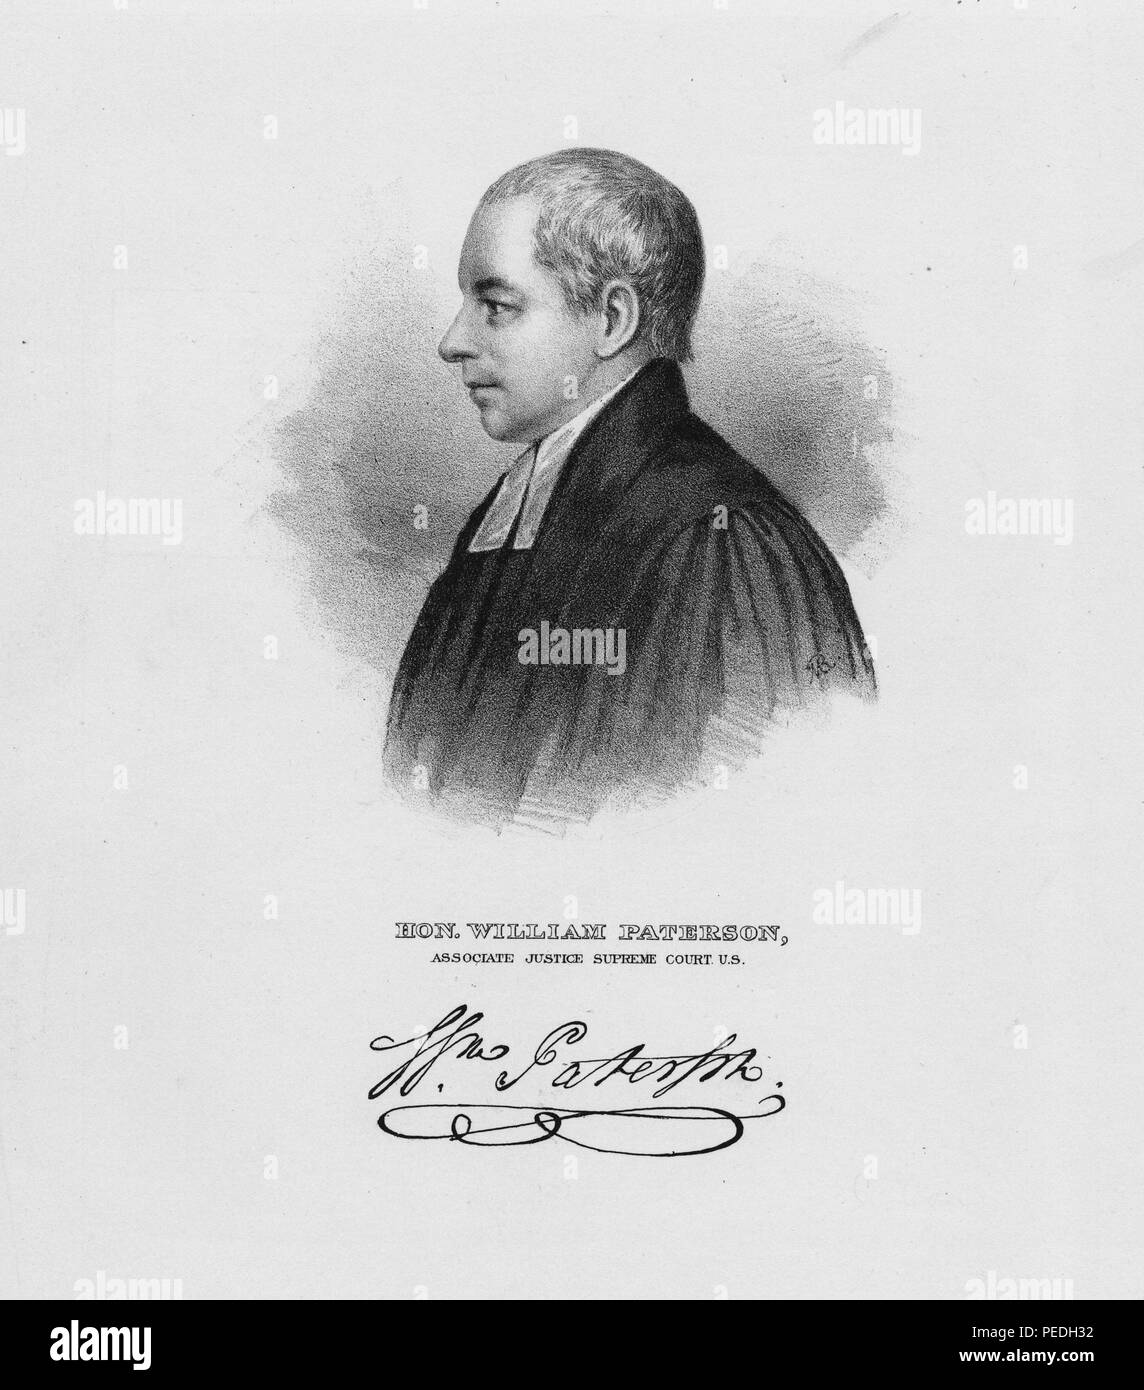 Black and white etching, depicting a profile, headshot portrait, of New Jersey statesman, US Constitution signatory, and United States Supreme Court Associate Justice, the Honorable William Paterson, wearing a dark, high collared, judicial coat, with a white tie, and a serious expression on his face, with his signature beneath the image, 1849. From the New York Public Library. () Stock Photo